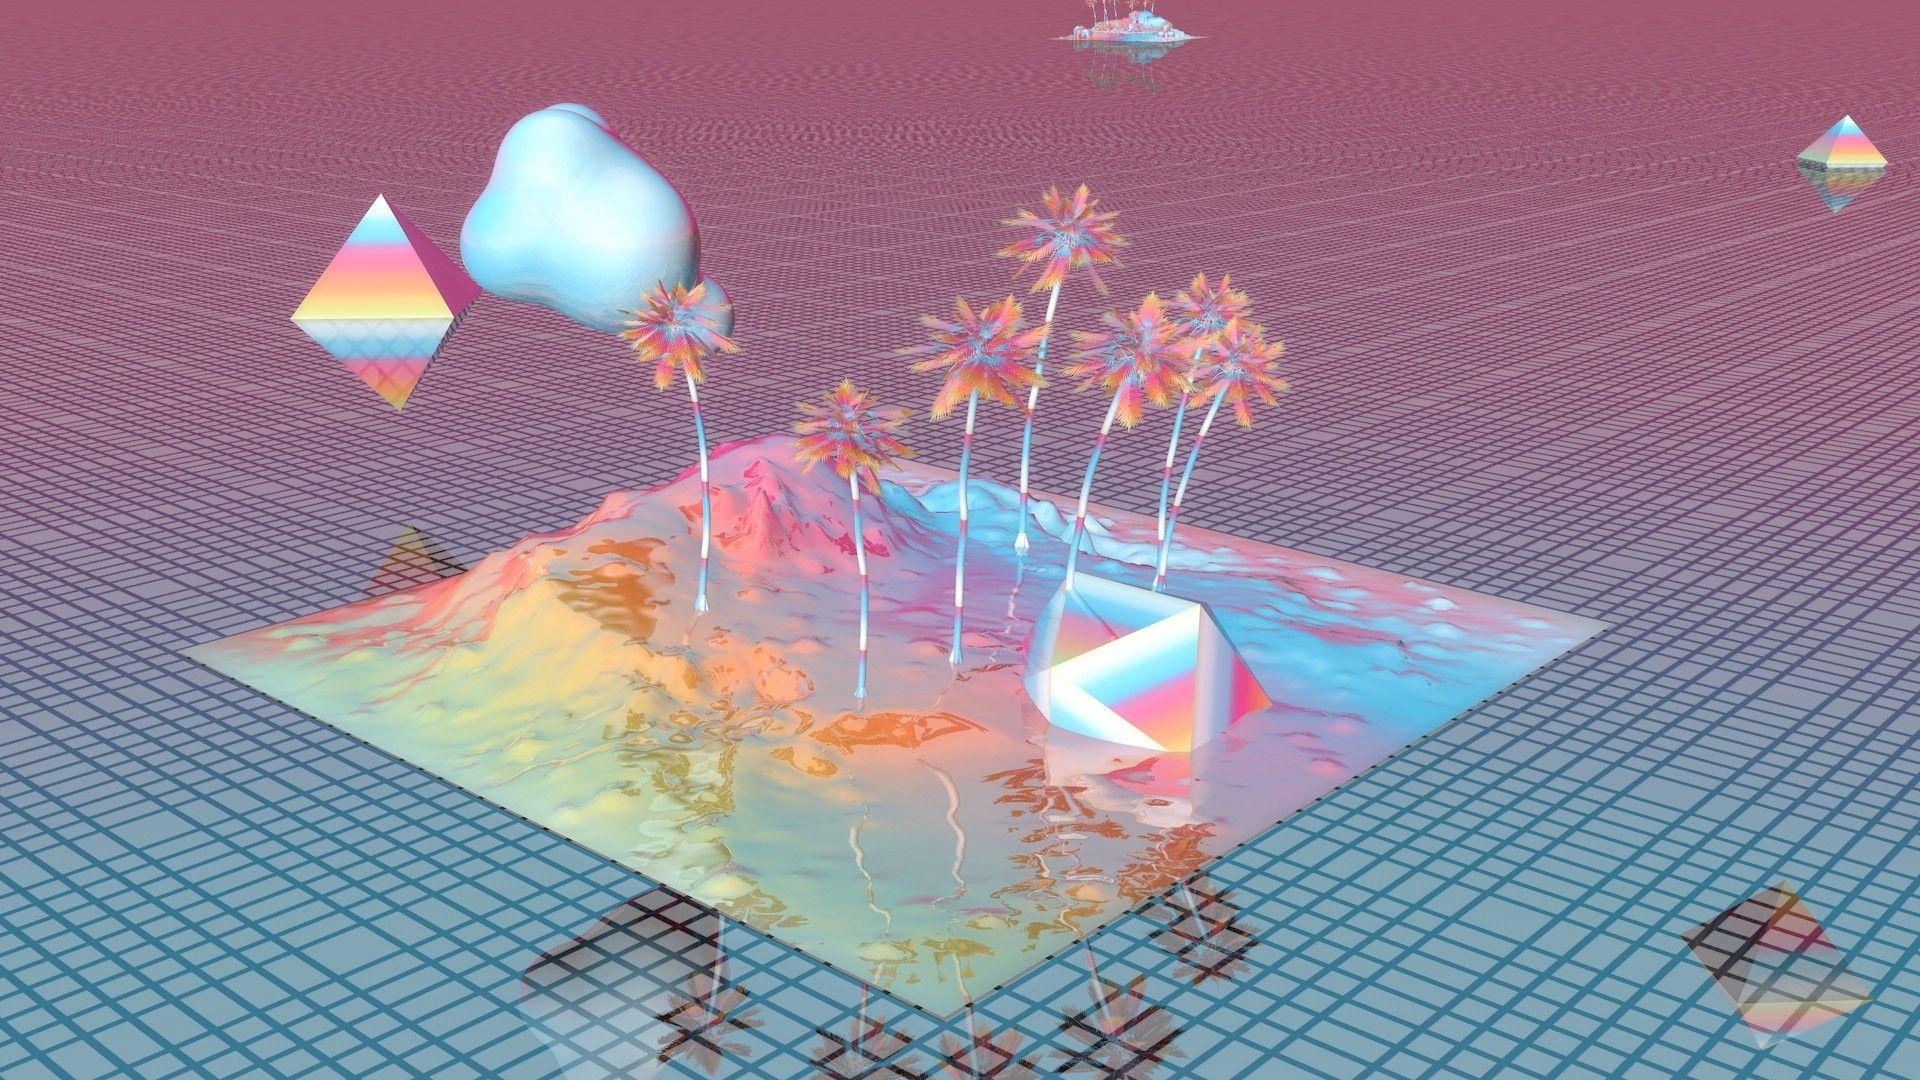 Vaporwave Wallpapers Image : 3D Object & CG Wallpapers